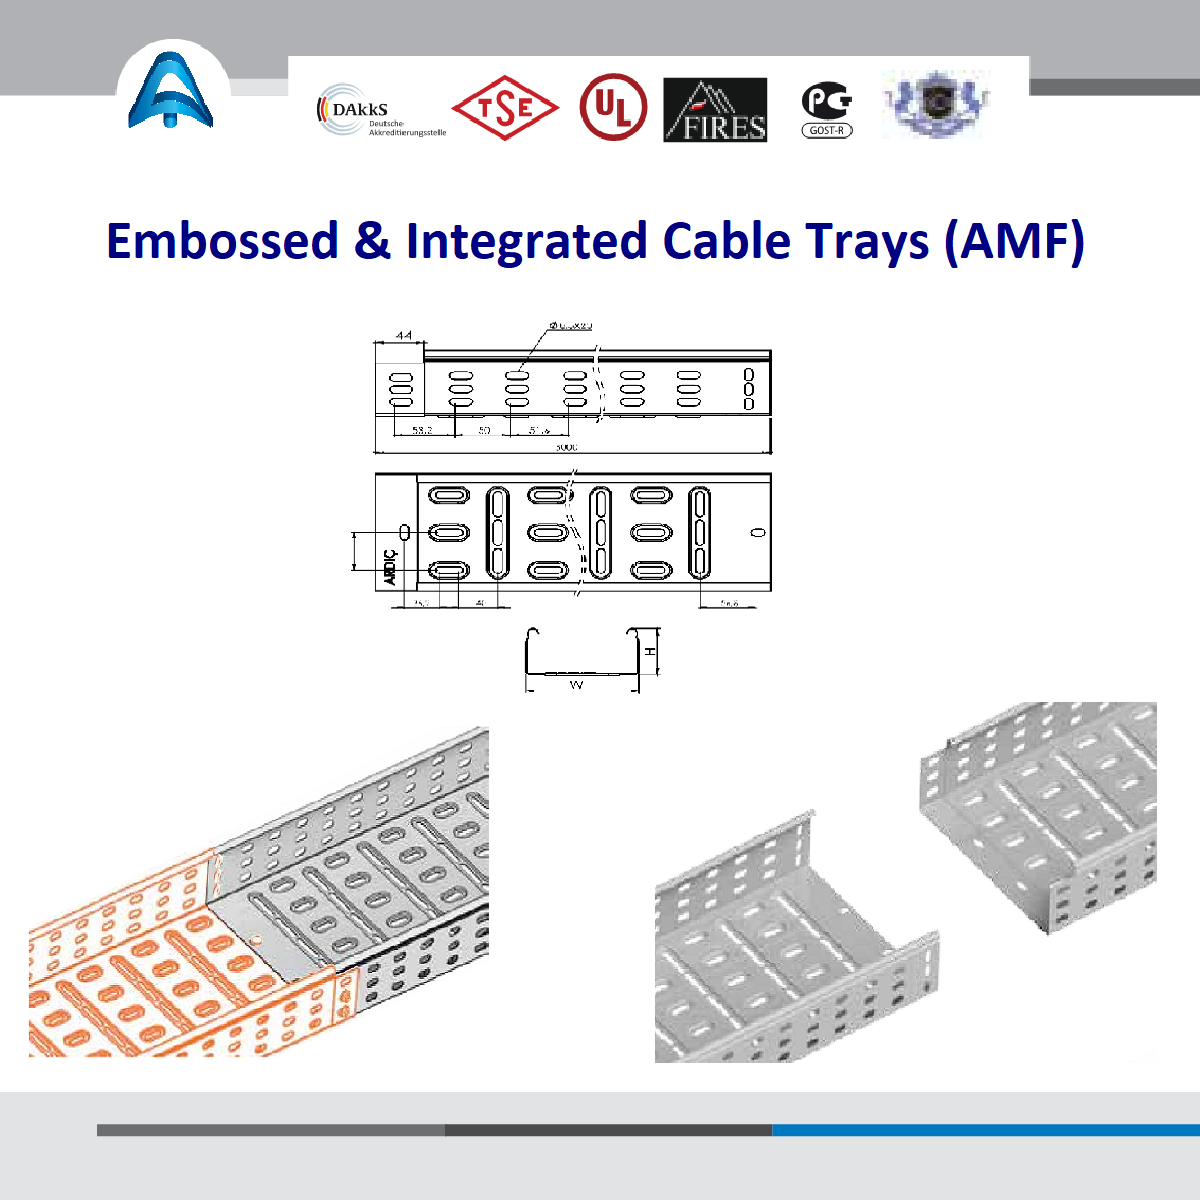 Embossed and Integrated Cable Trays (AMF Series)